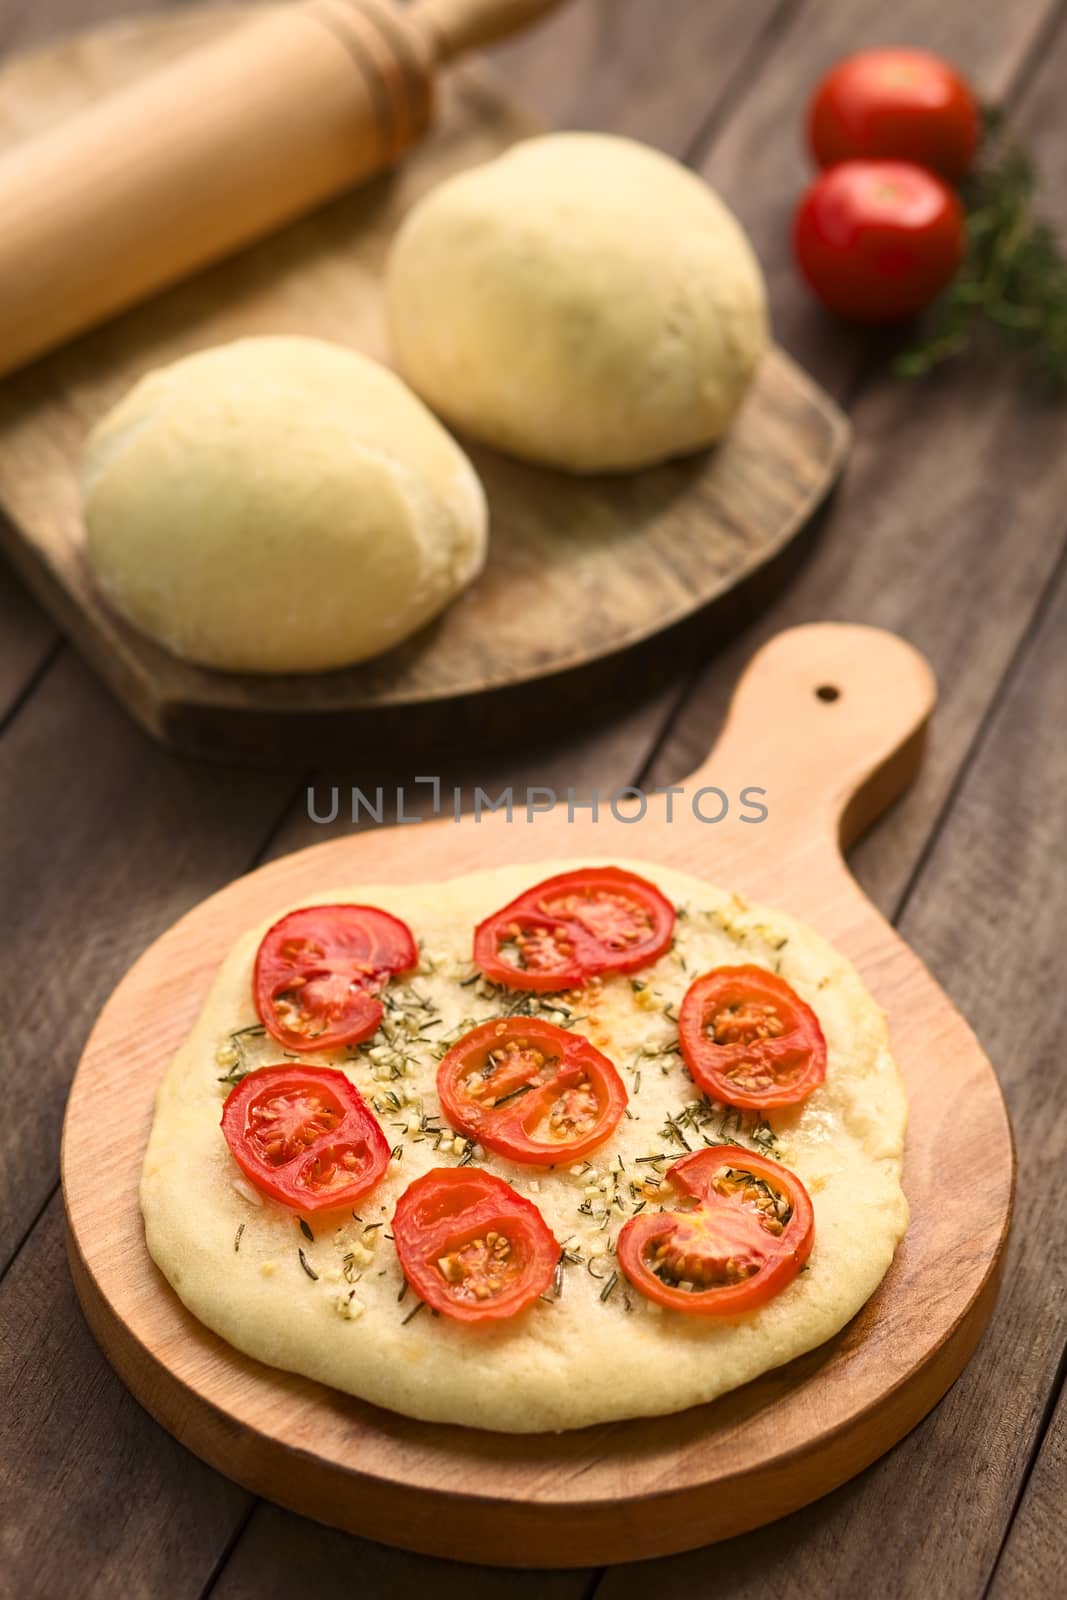 Freshly baked homemade flatbread made of a yeast dough topped with tomato slices, garlic and thyme leaves served on wooden board with balls of yeast dough in the back (Selective Focus, Focus on the front of the tomato slice in the middle)  